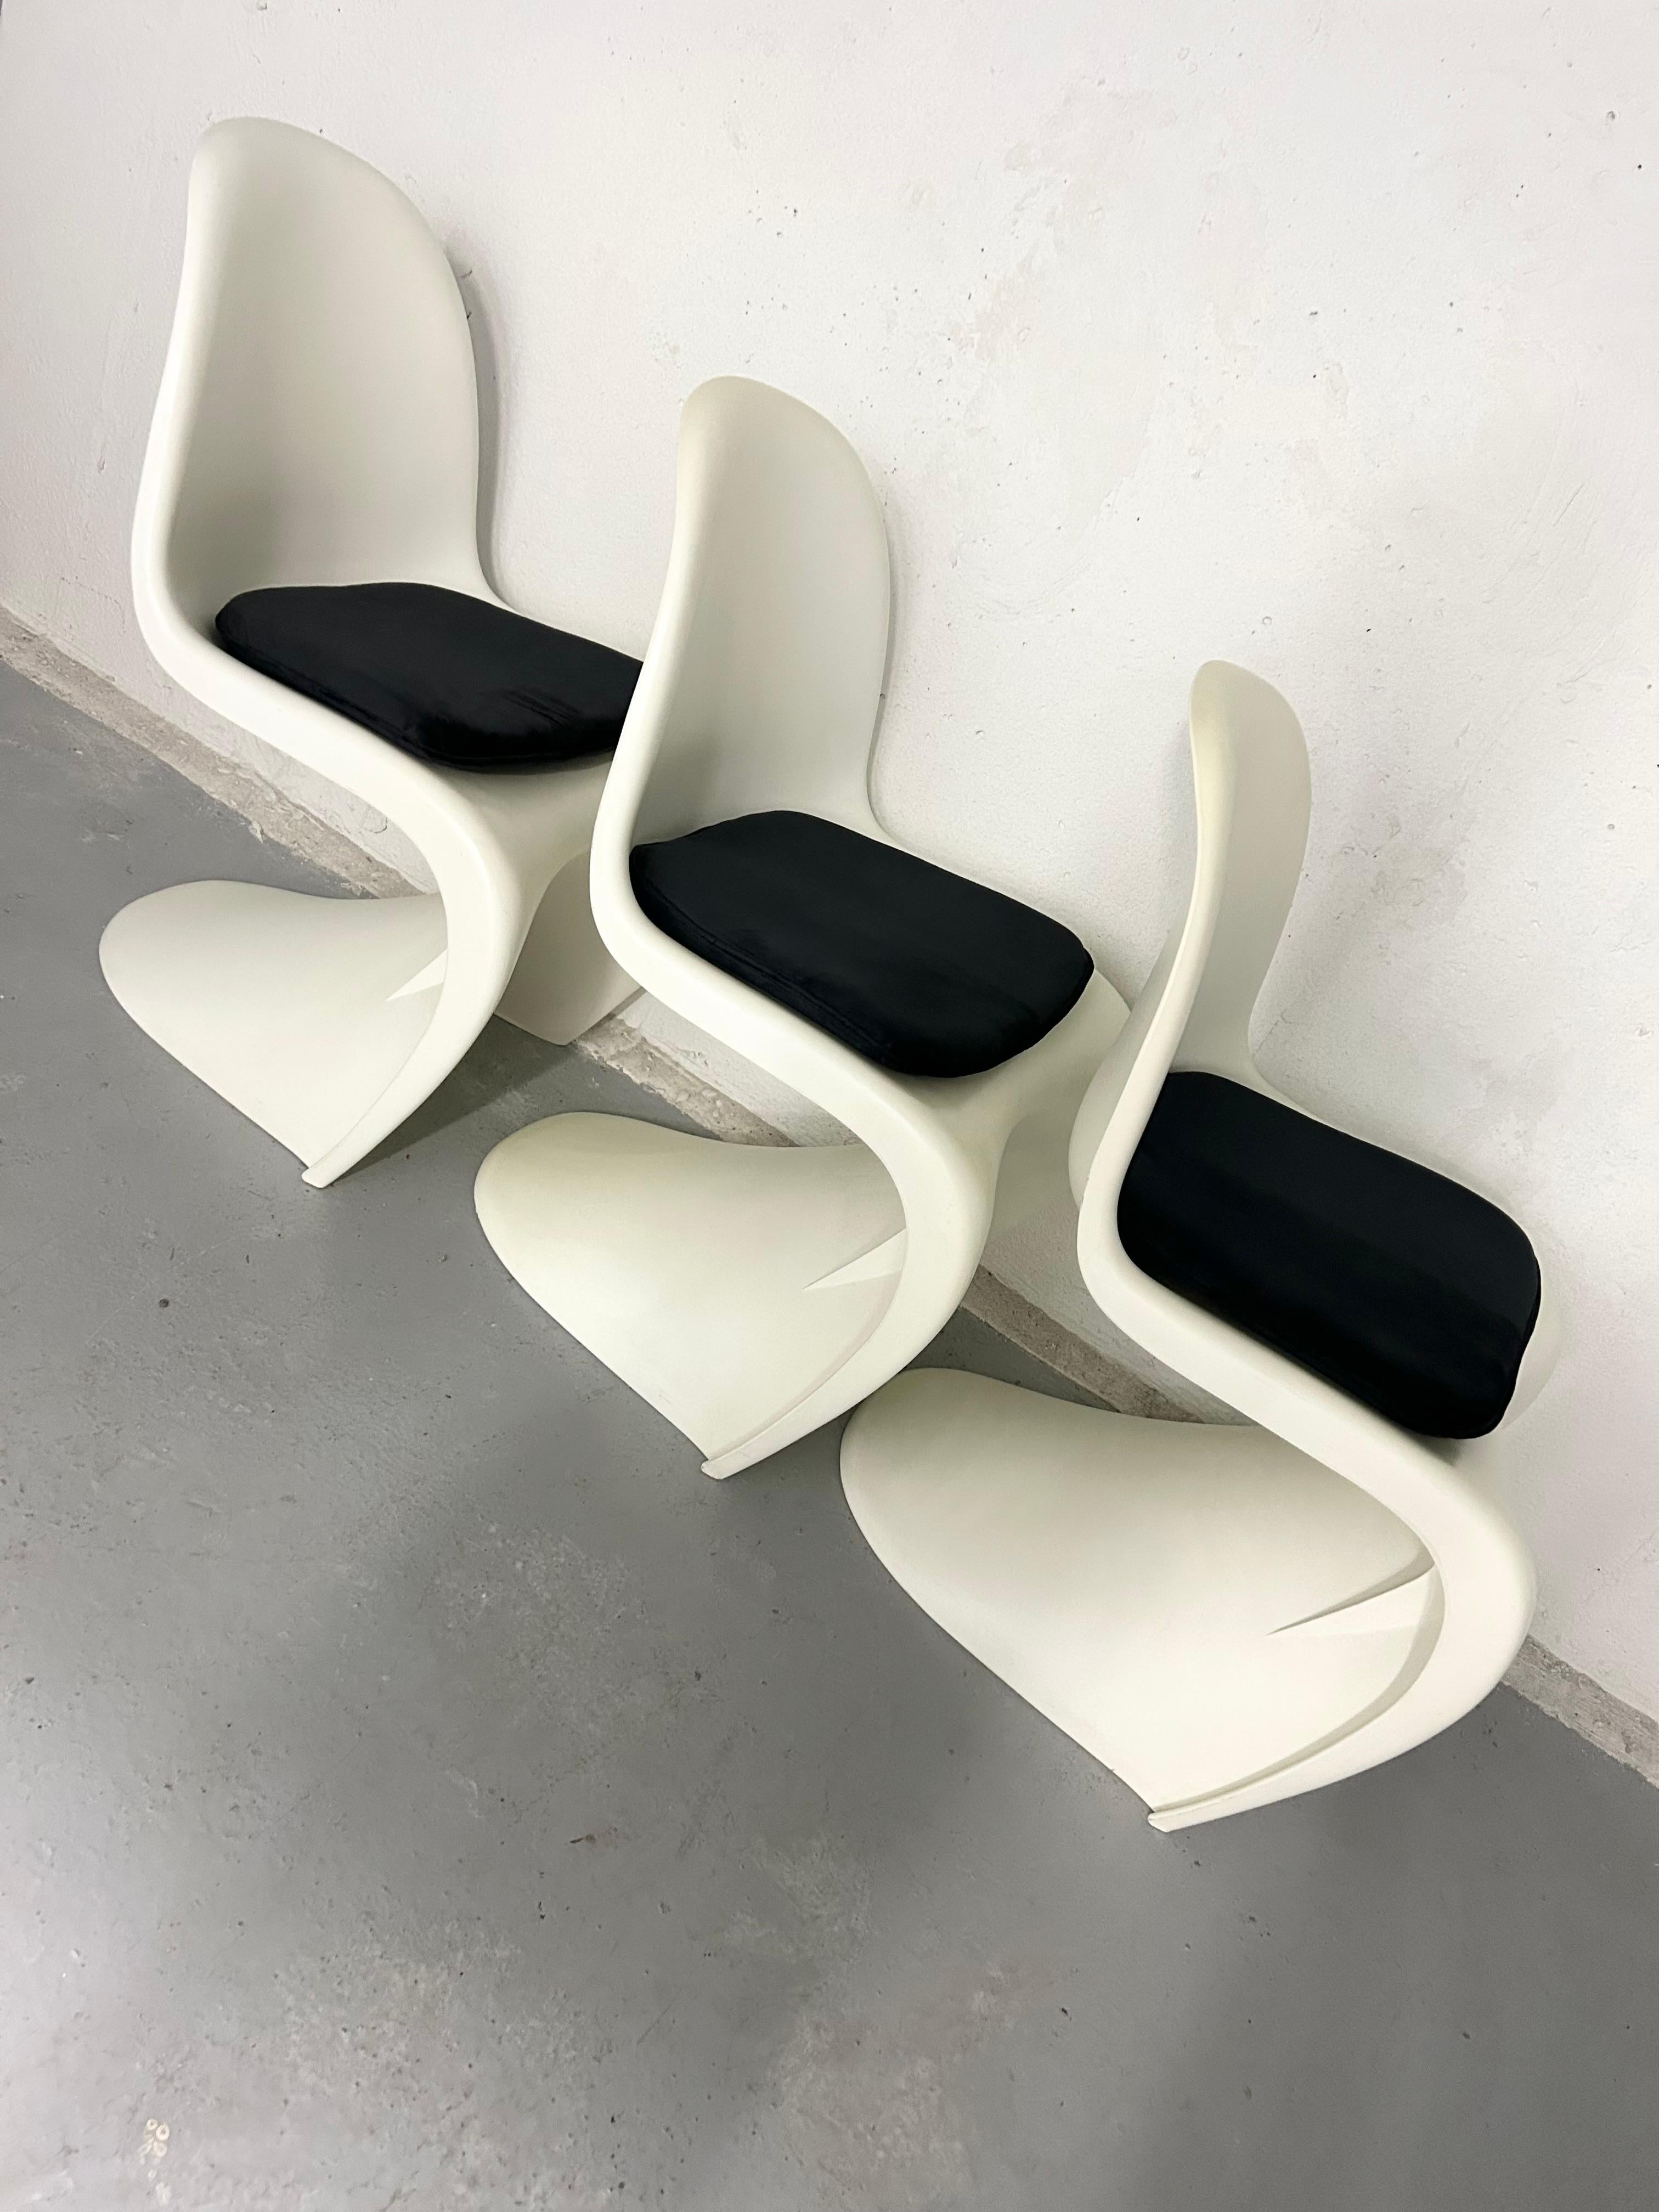 3 available - vintage Vernor Panton style chairs - reproductions from the 70s. No manufacturer markings. Minimal wear - one chair has small marks on one edge. Seat cushions were purchased new to style the chairs and are included but they’re not